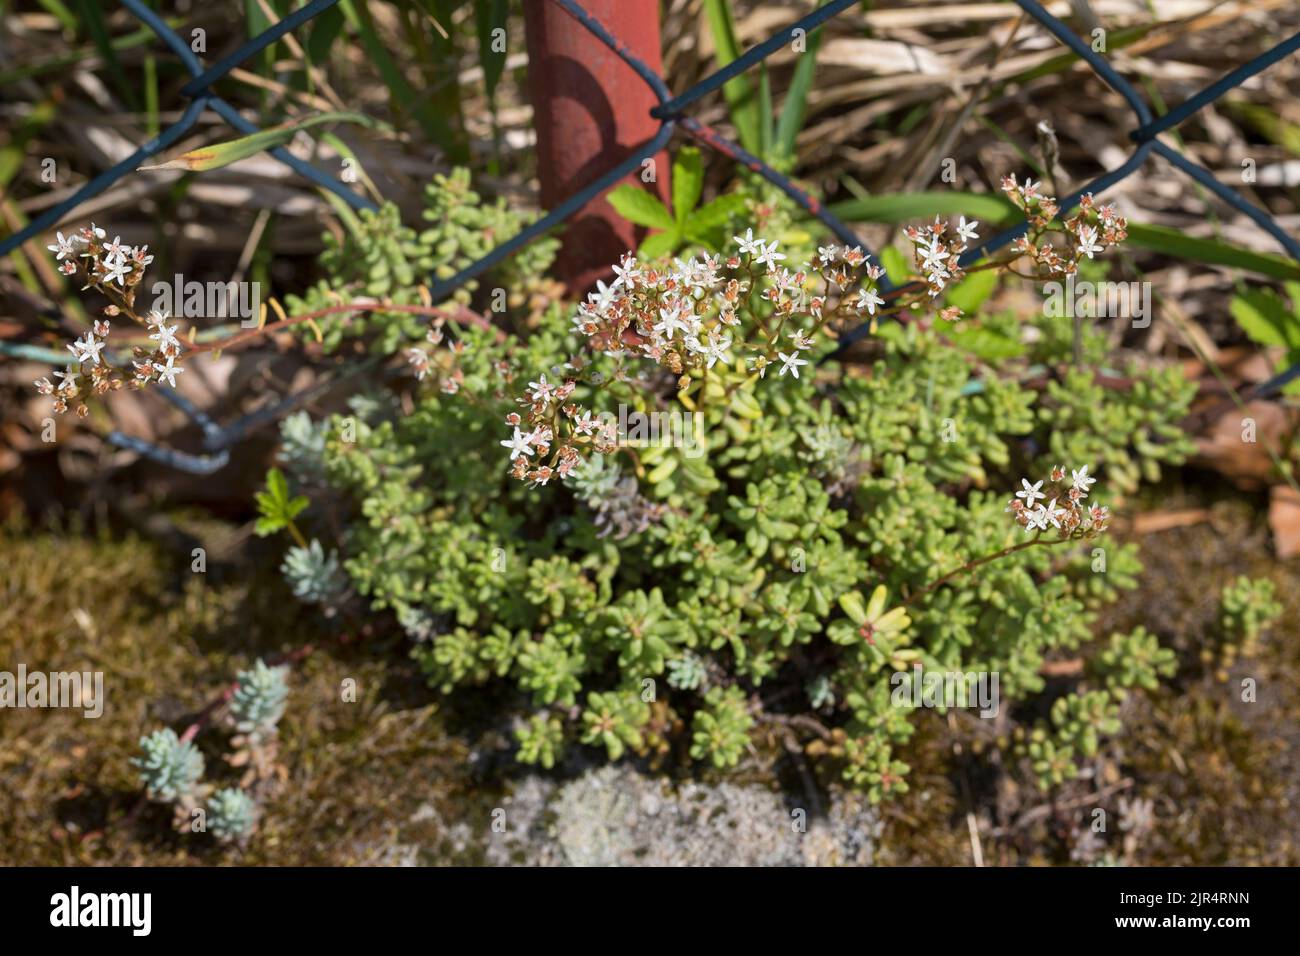 white stonecrop (Sedum album), blooming at a fence, Germany Stock Photo